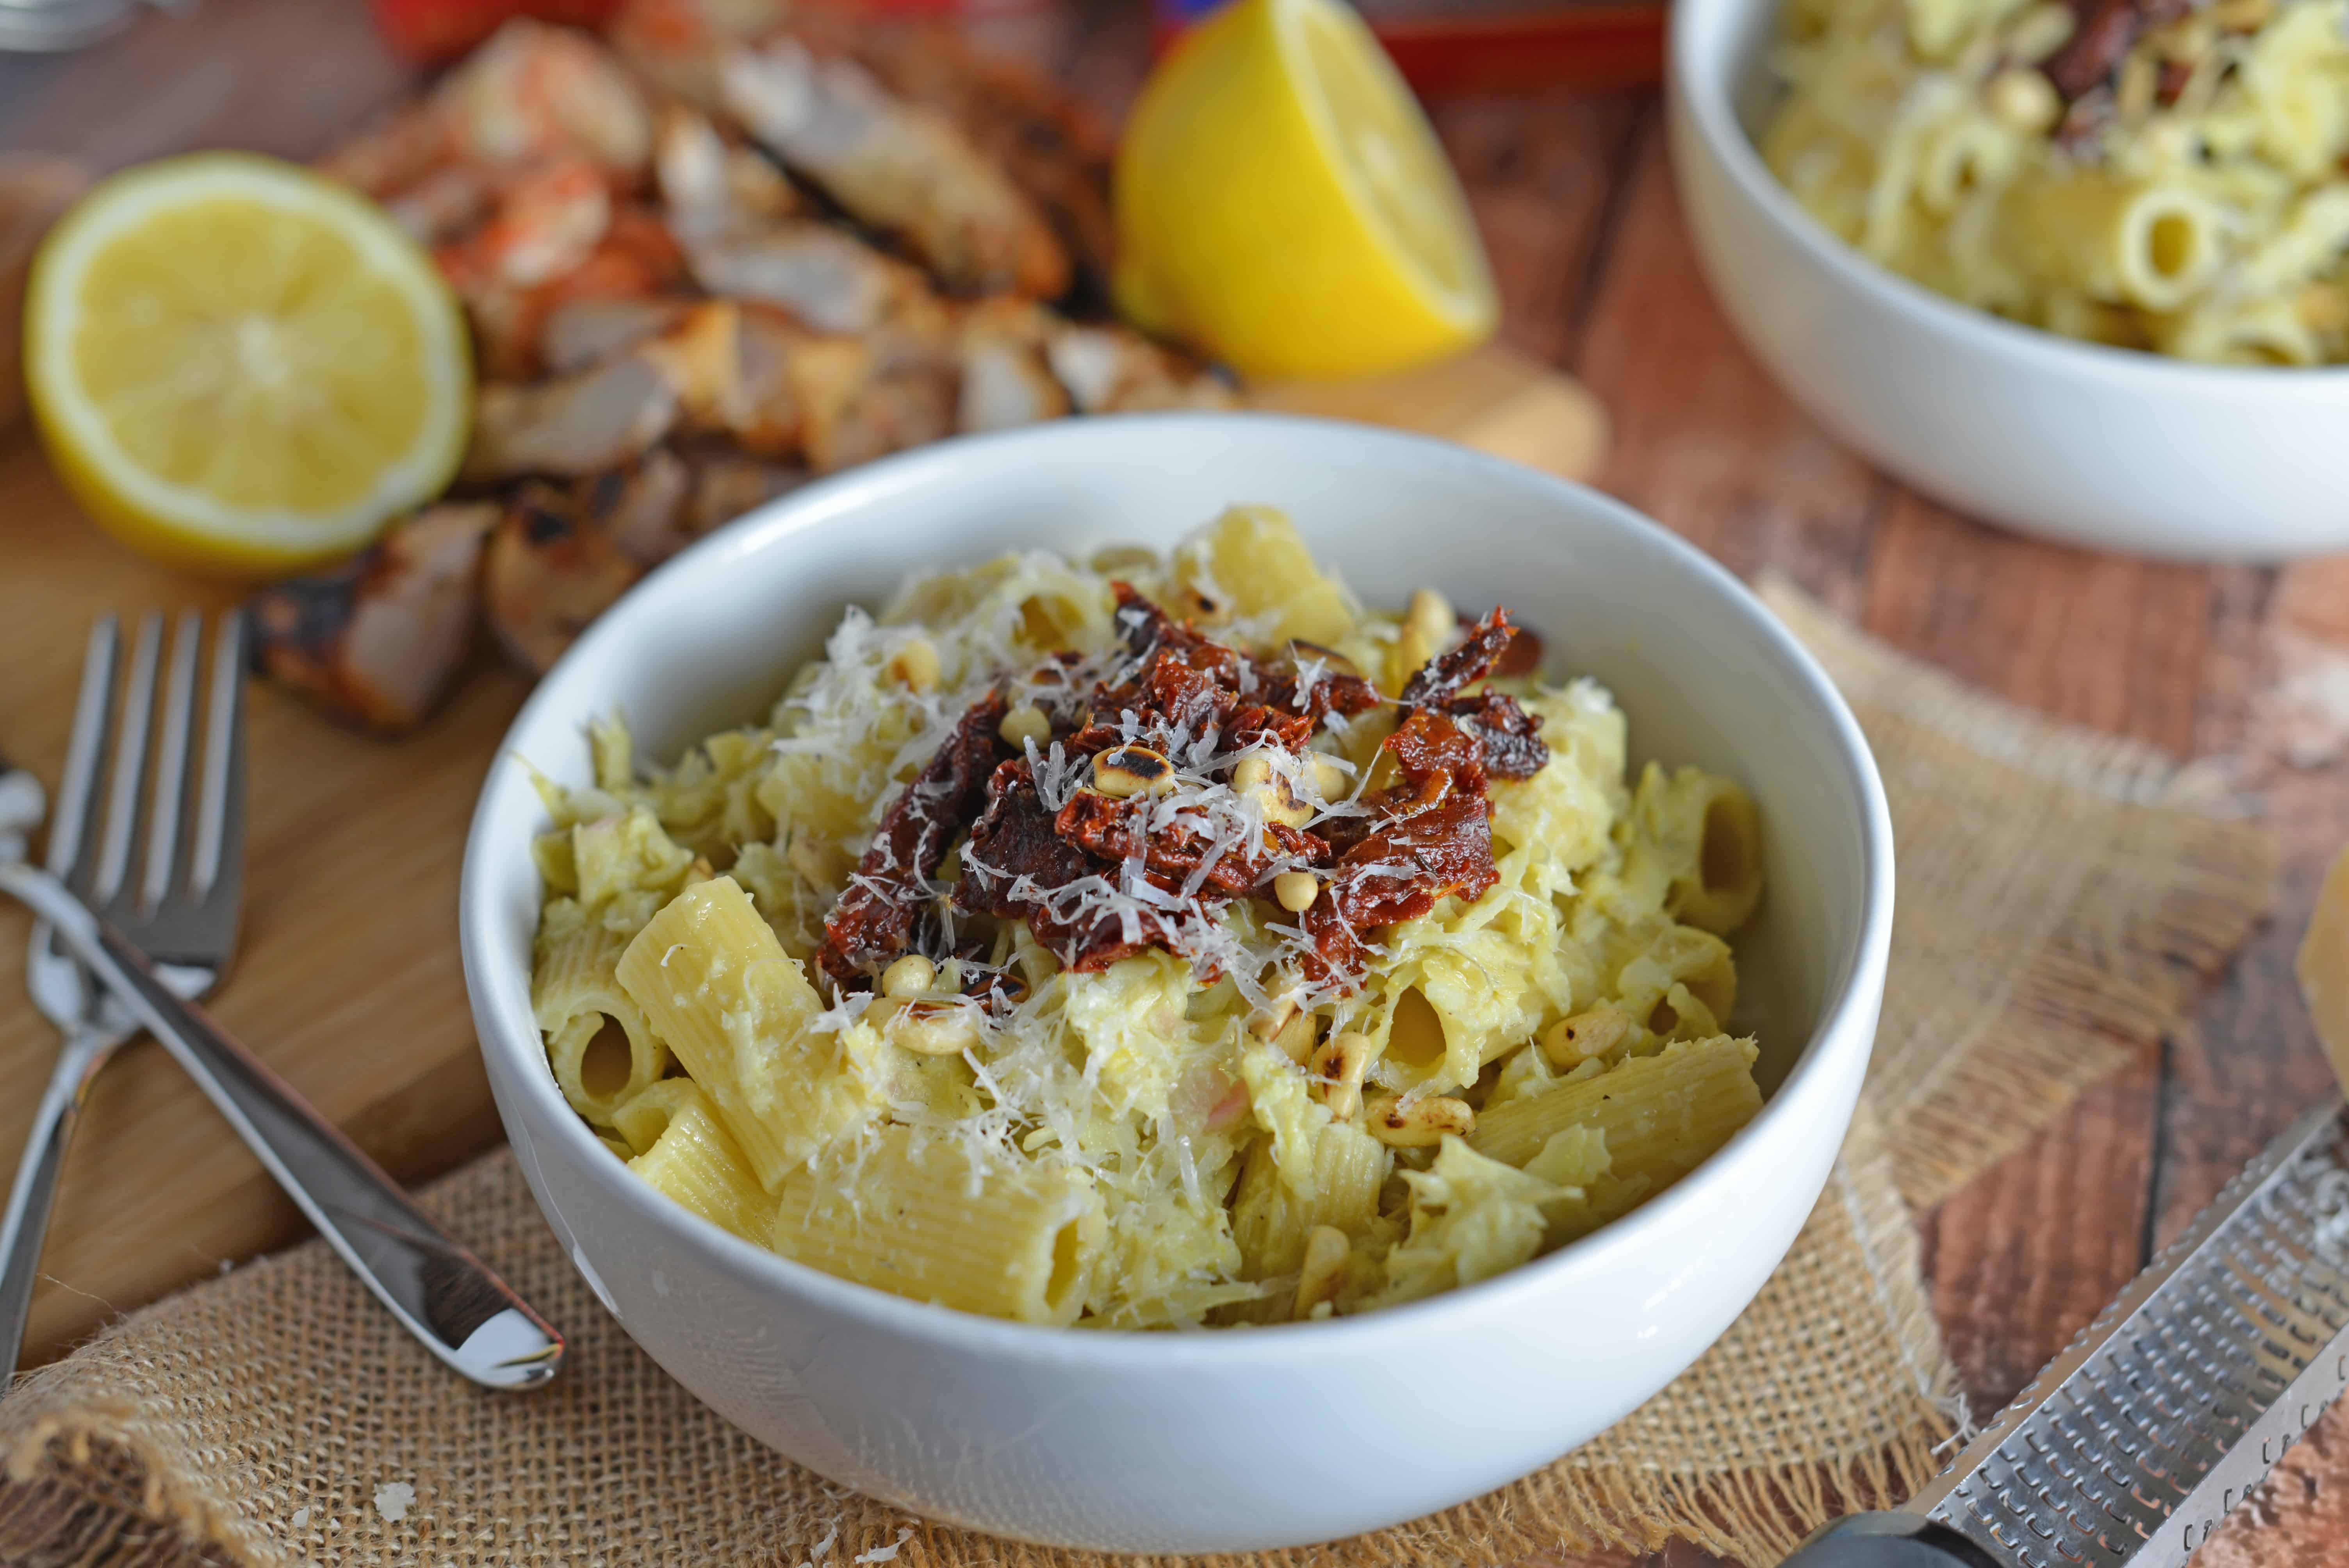 Lemony Artichoke Pesto is a fresh and punchy sauce perfect for summer meals and pasta. Takes only minutes to make, stores and freezes well and makes an excellent gift. Top with pine nuts, sun dried tomatoes and Parmesan Reggiano cheese. www.savoryexperiments.com